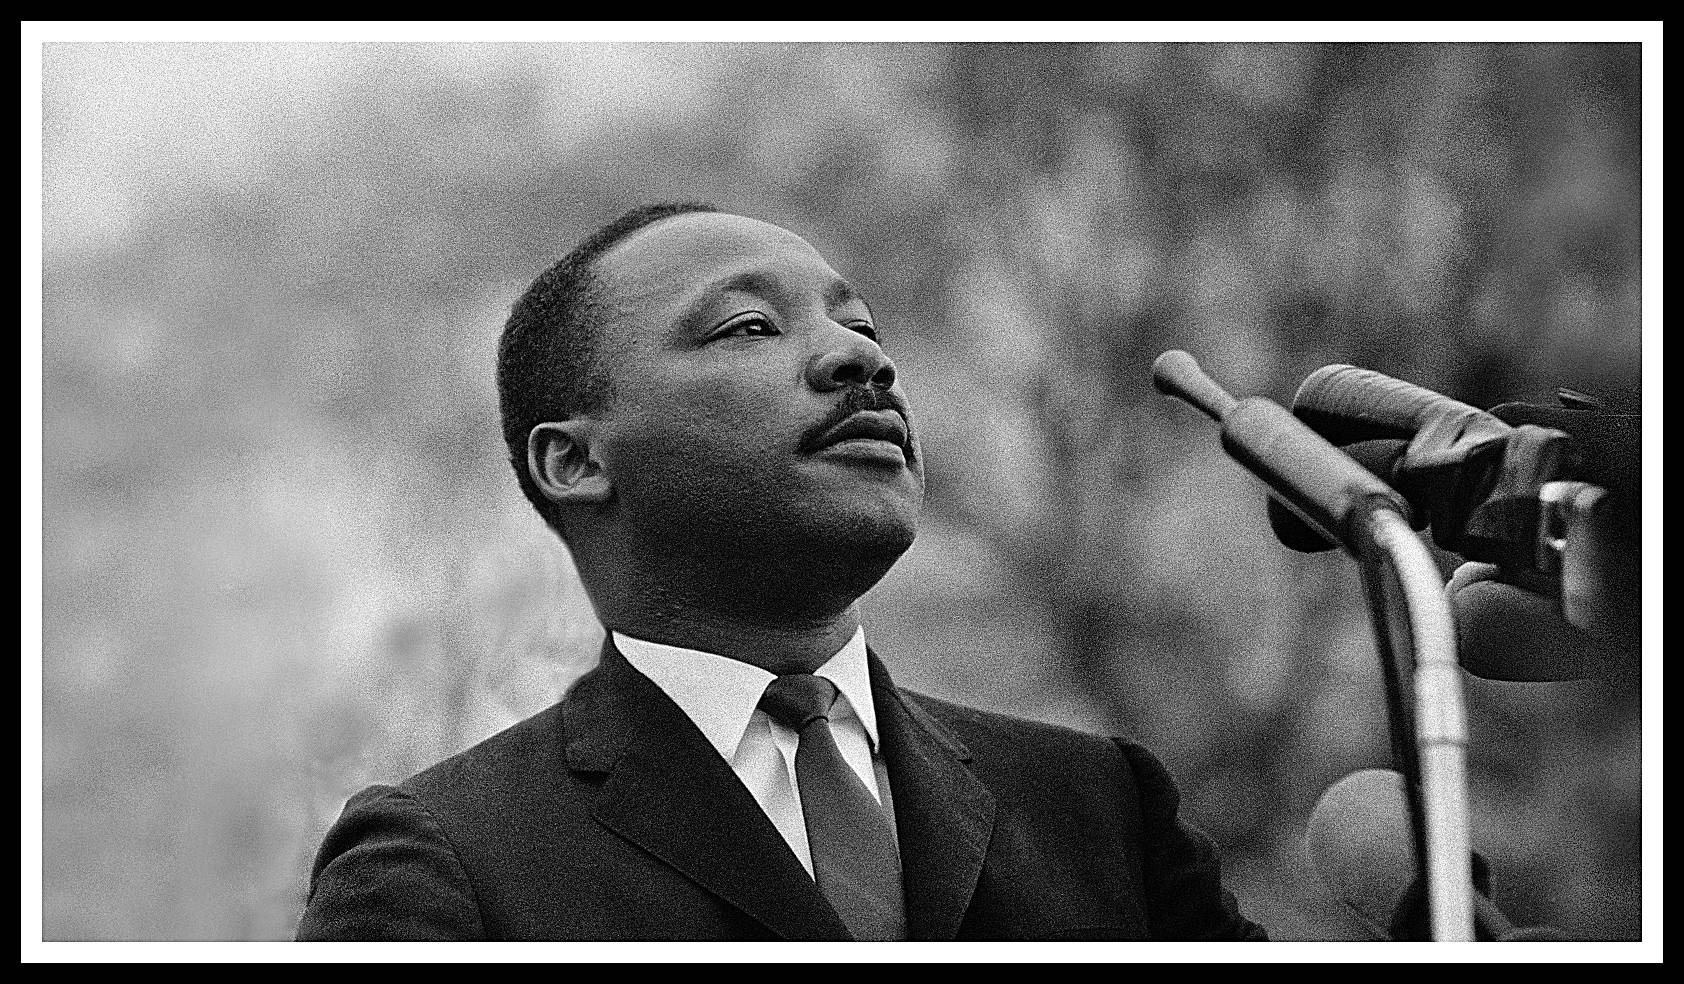 MONTGOMERY, AL - MARCH 25: Dr. Martin Luther King, Jr. speaking before crowd of 25,000 Selma To Montgomery, Alabama civil rights marchers, in front of Montgomery, Alabama state capital building. On March 25, 1965 in Montgomery, Alabama 